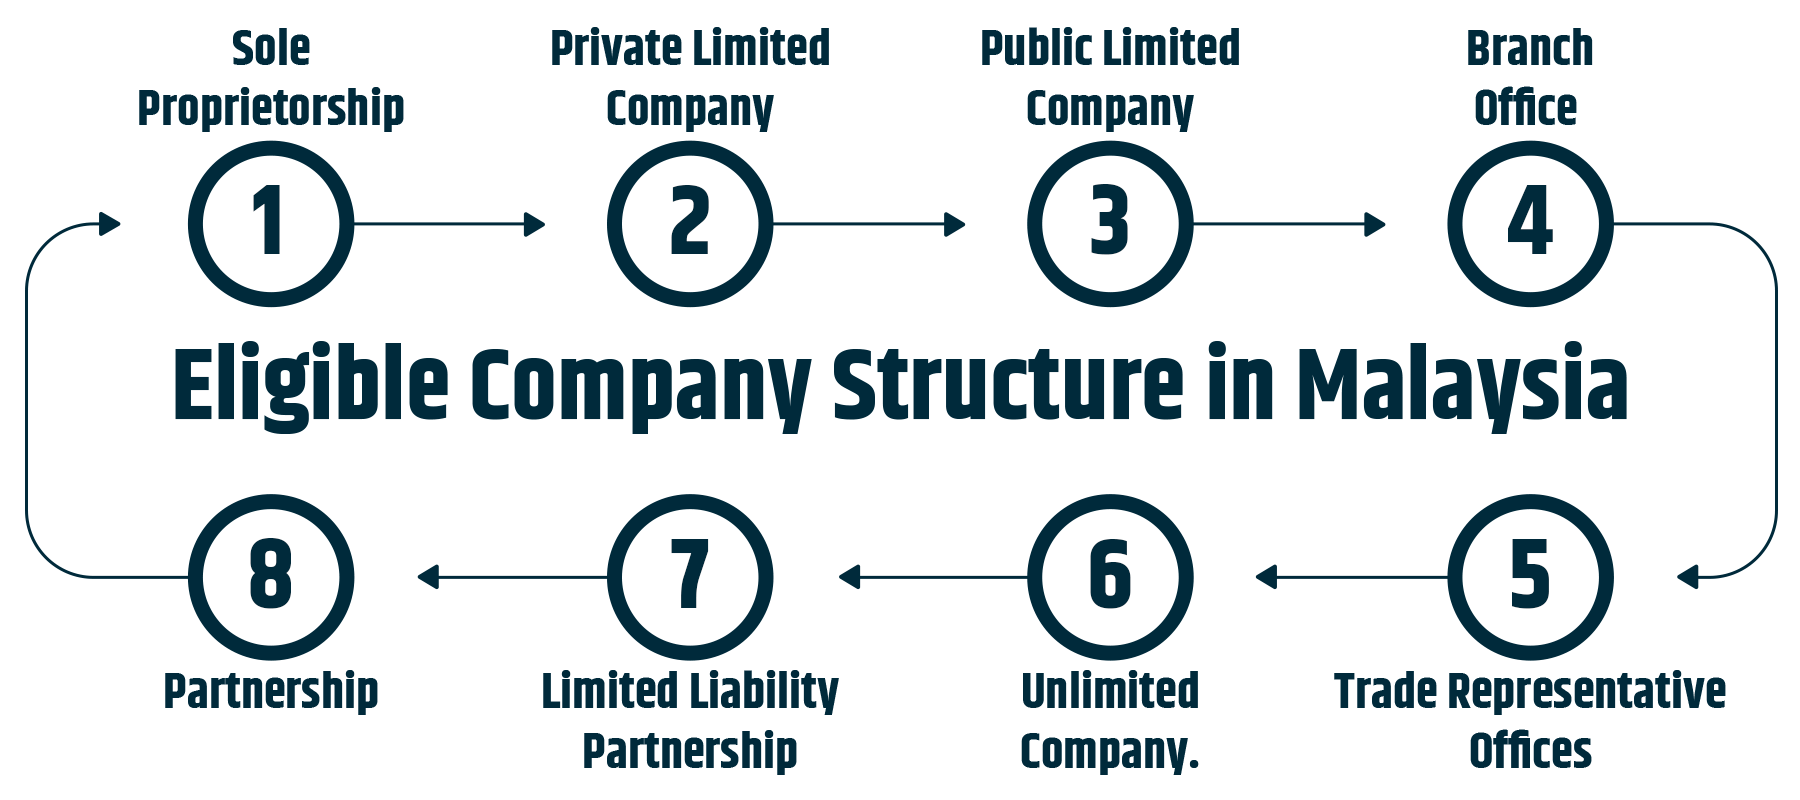 these are the structure of companies in malaysia